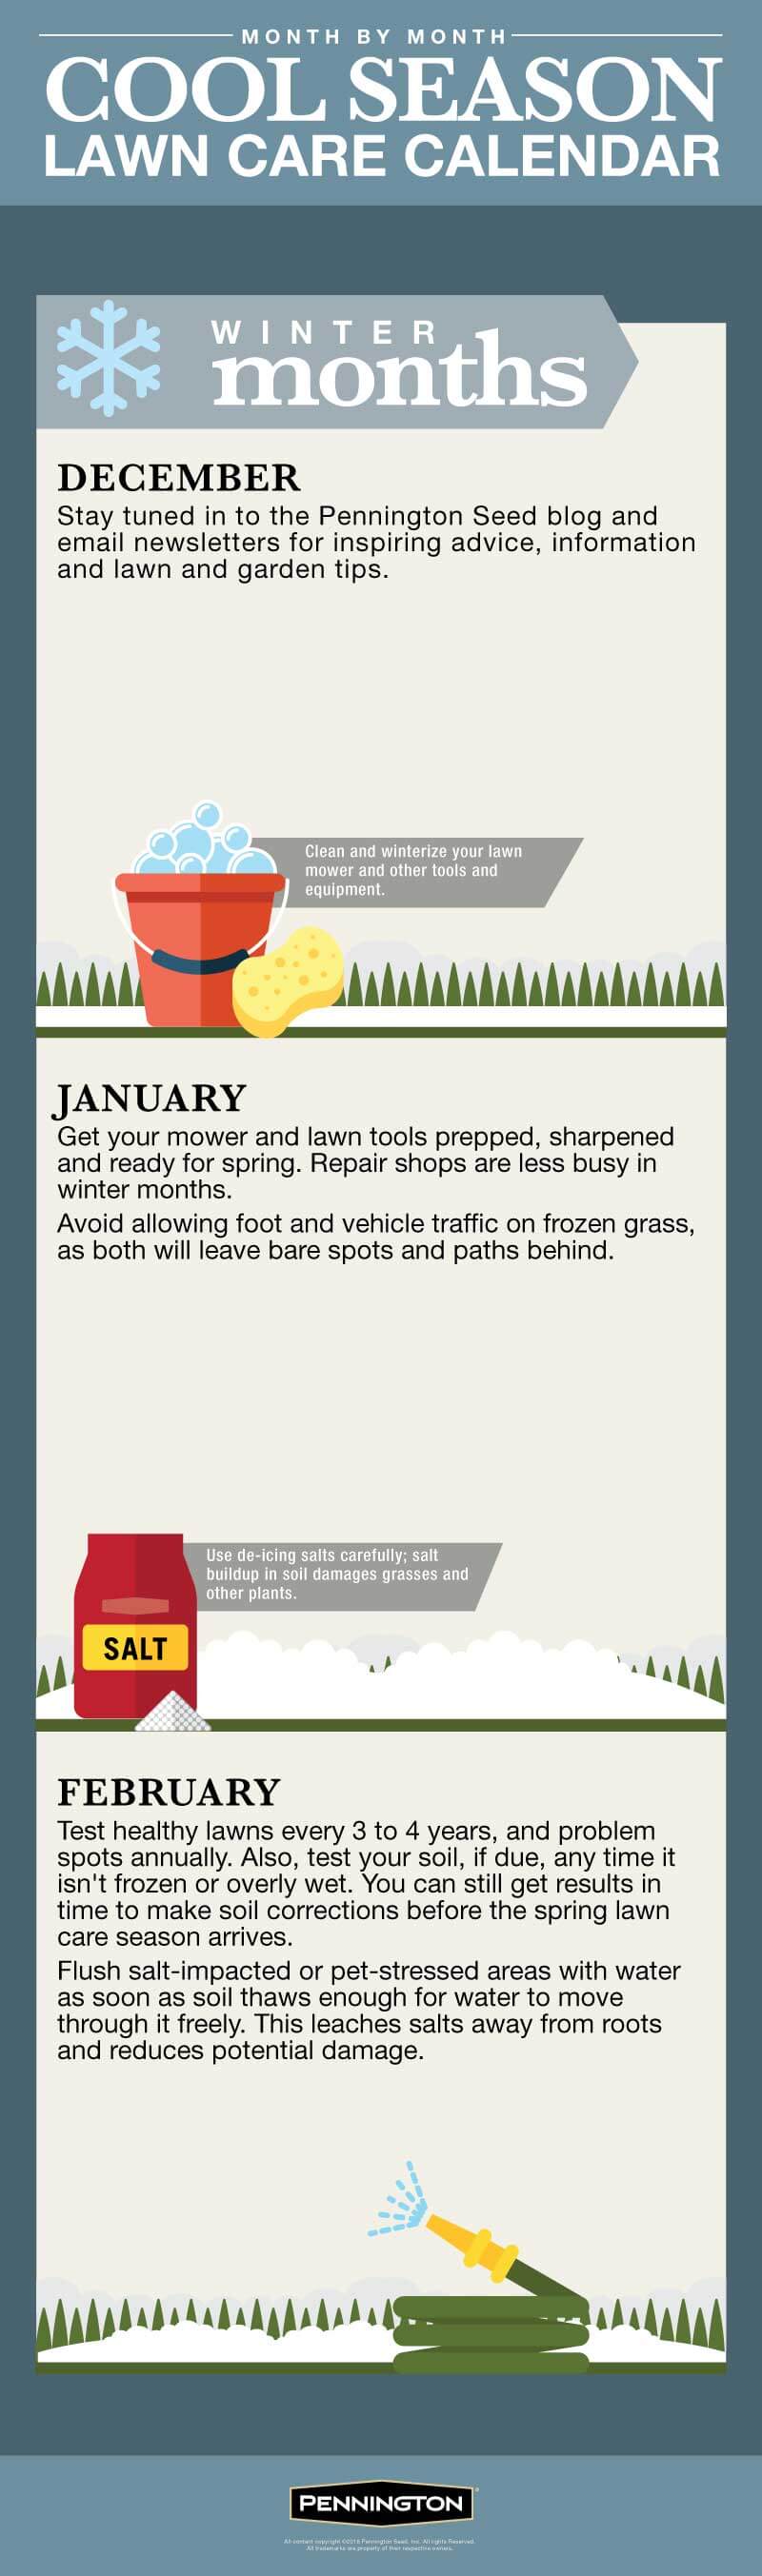 Lawn Care Calendar for Cool Season Lawns Infographic